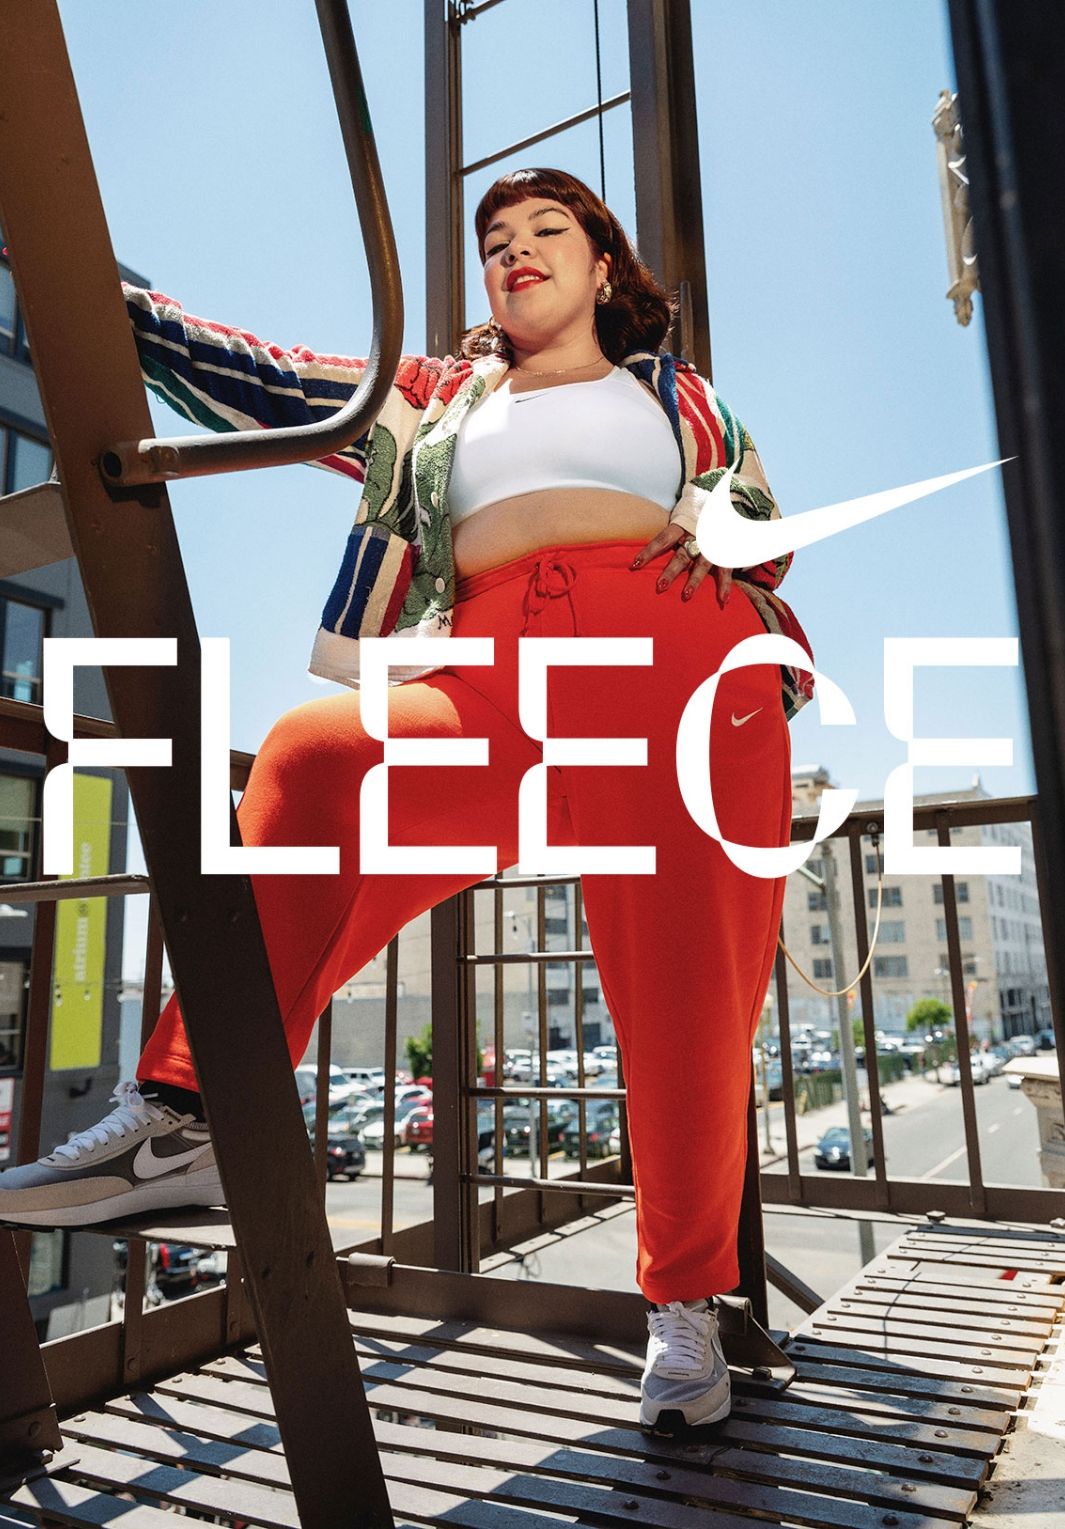 Women in bright red pant posing on fire escape on sunny day. Nike Fleece Logo